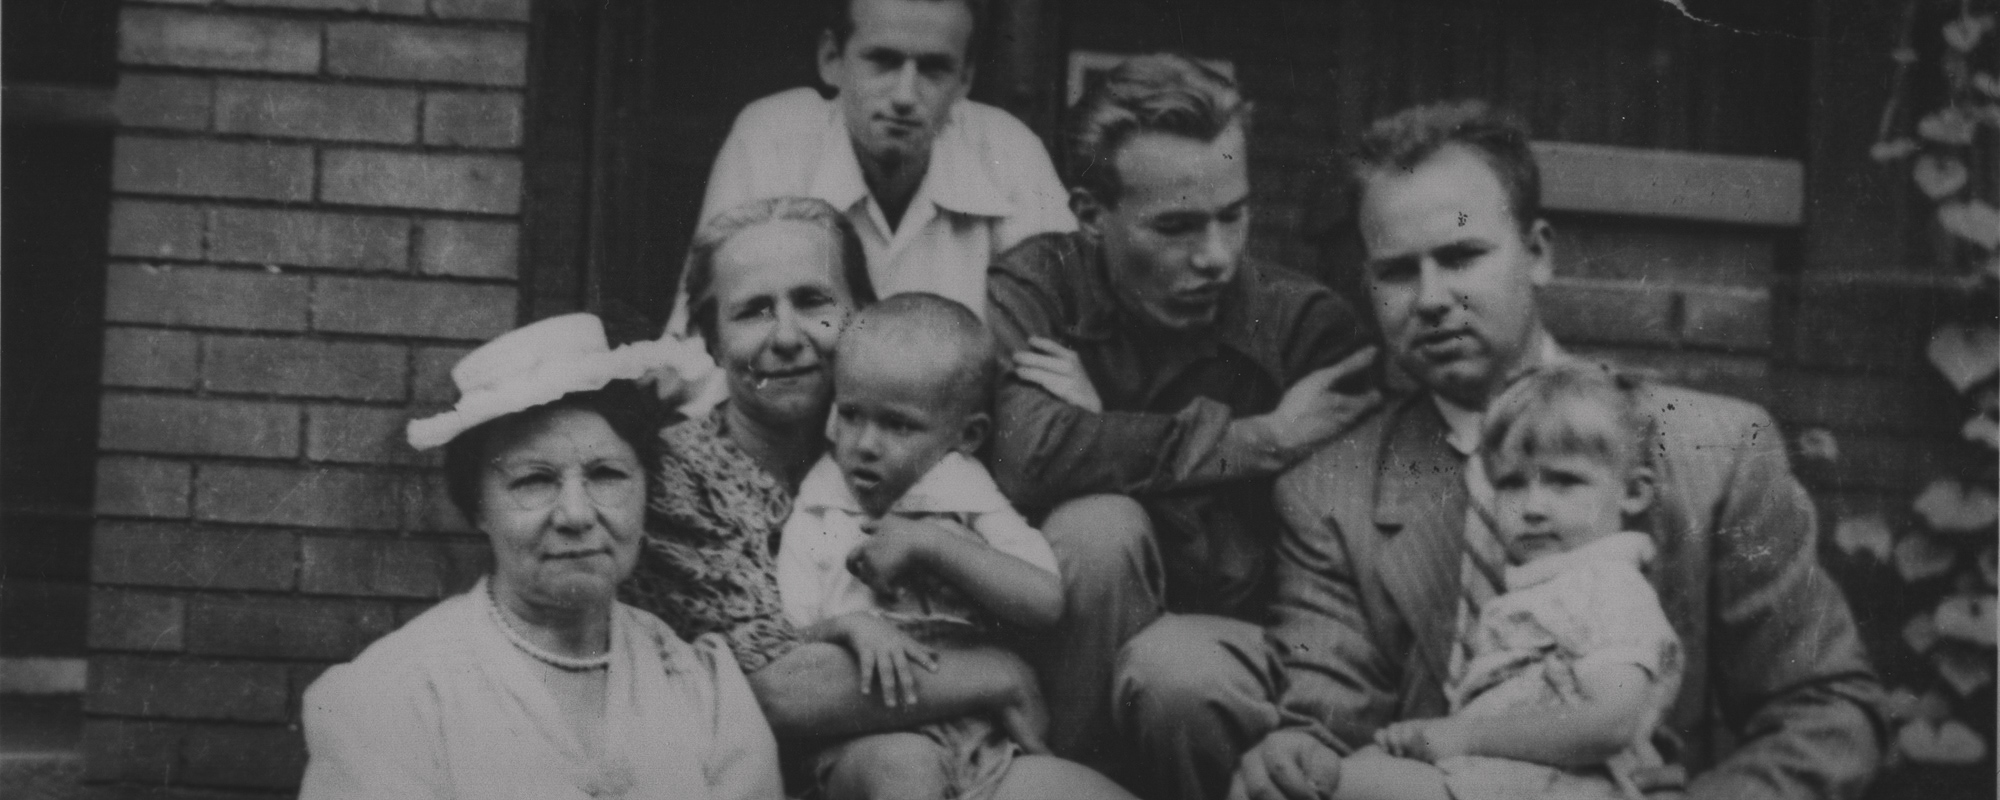 A black and white photo of the Warhola family in 1945